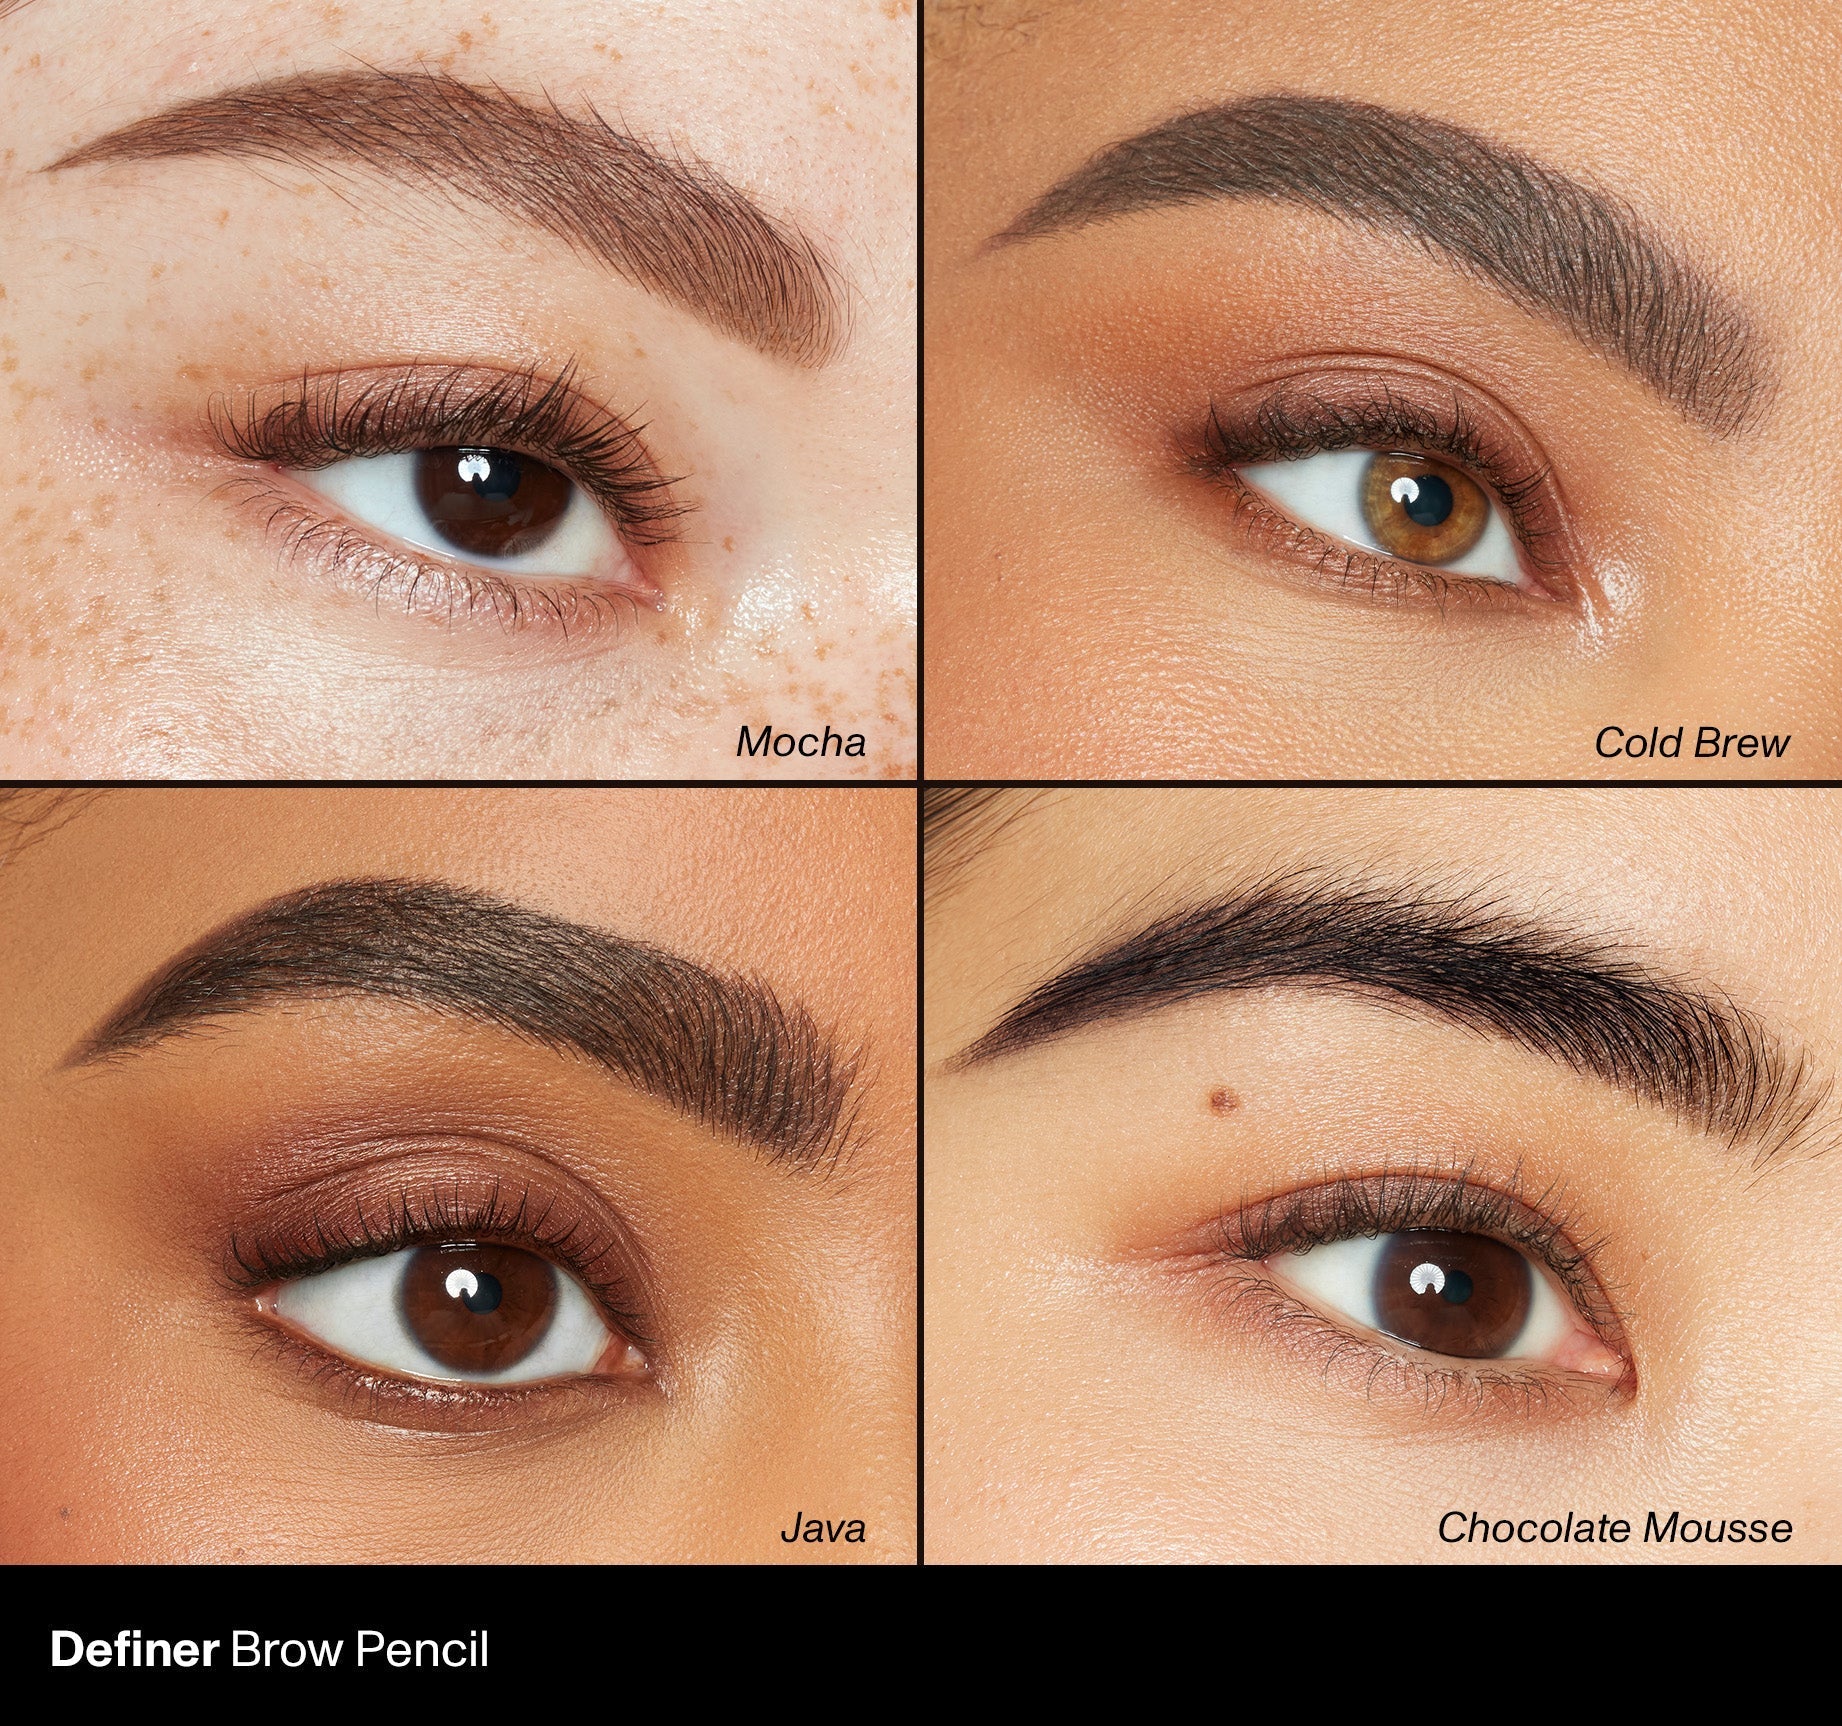 Definer Dual-Ended Brow Pencil & Spoolie - Cold Brew - Image 3